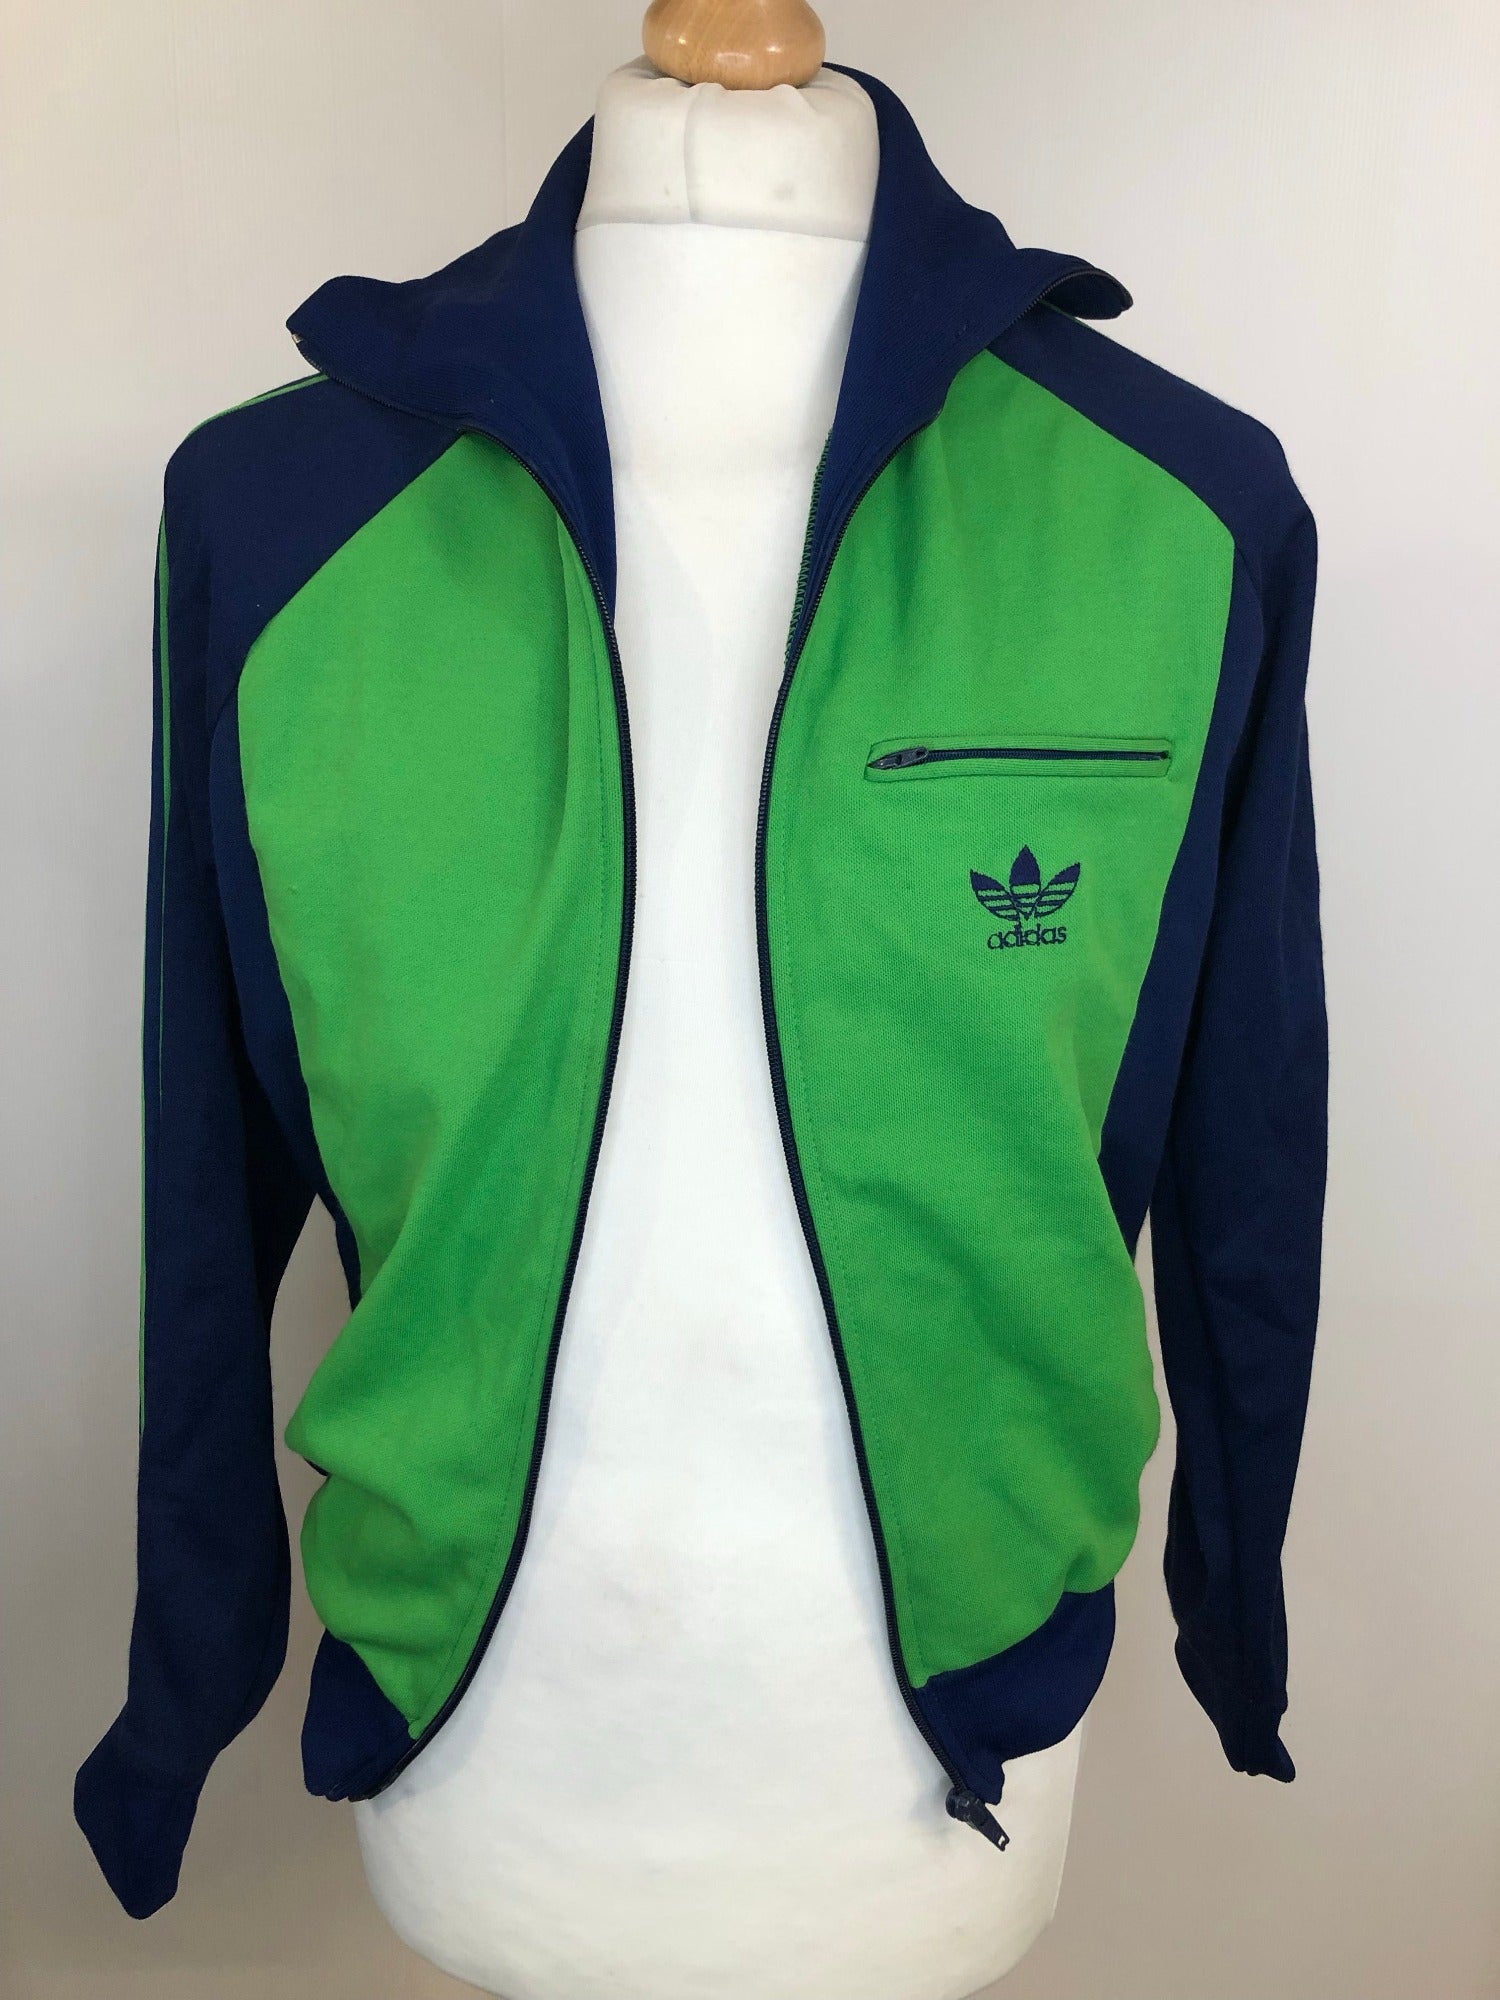 1970s Adidas Zip up Track Top in Navy and Green - Size S - Urban ...